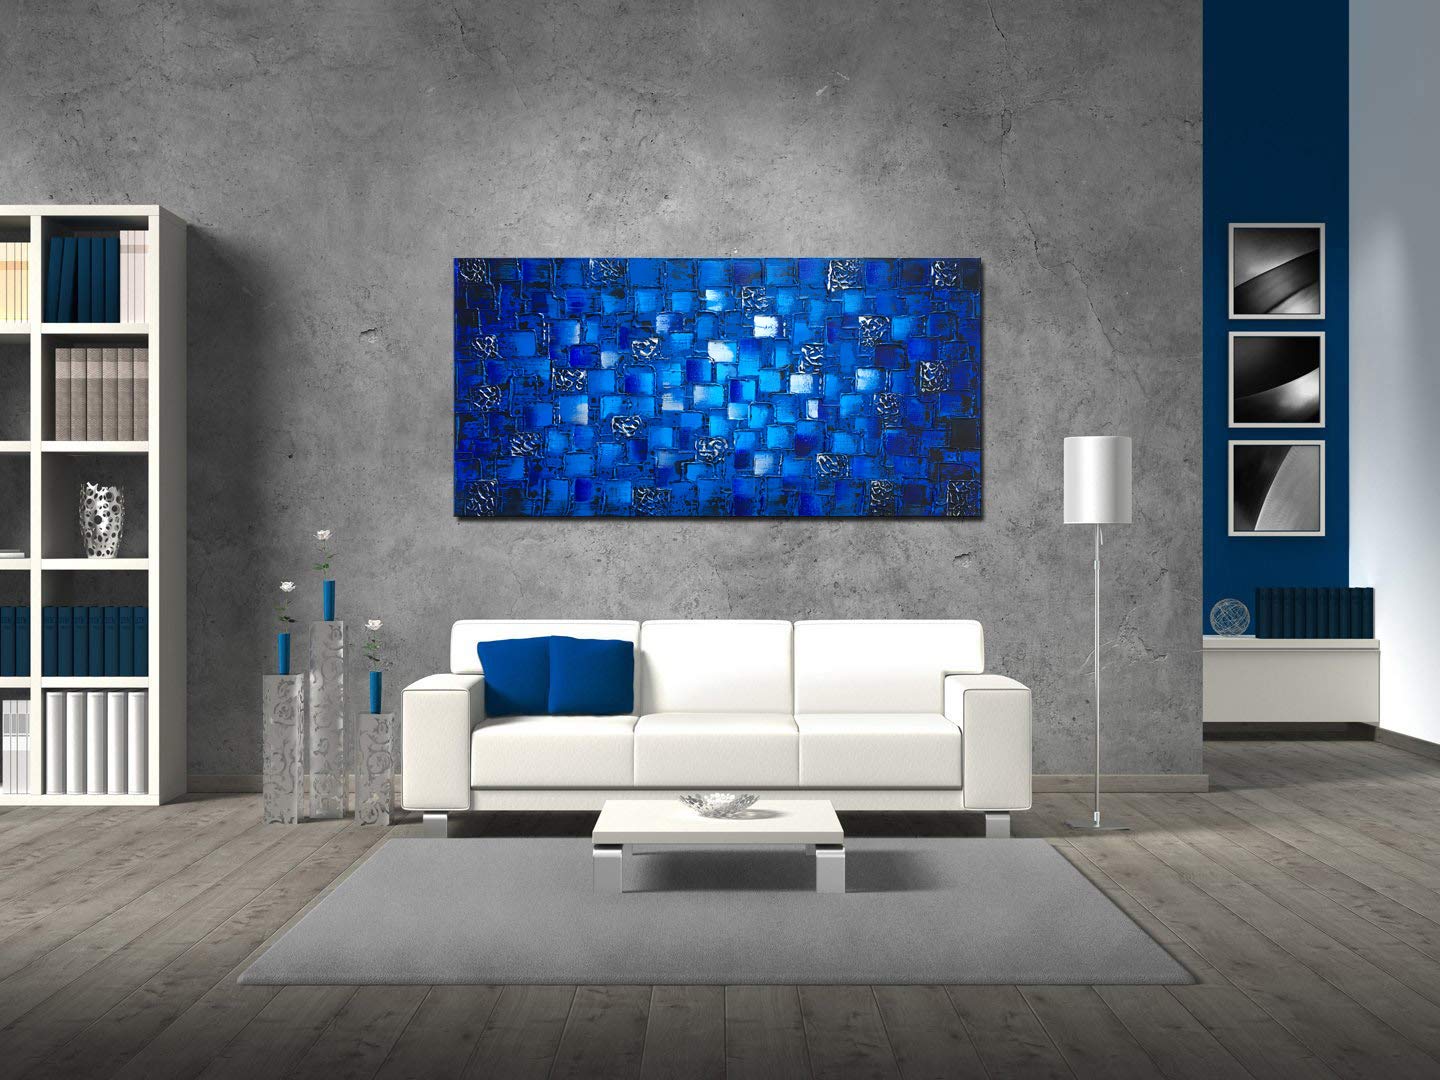 MyArton Thick Textured Abstract Squares Canvas Wall Art Hand Painted Artwork Modern Dark Blue add Silver Oil Painting for Home Decor Framed Ready to Hang 48x24inch